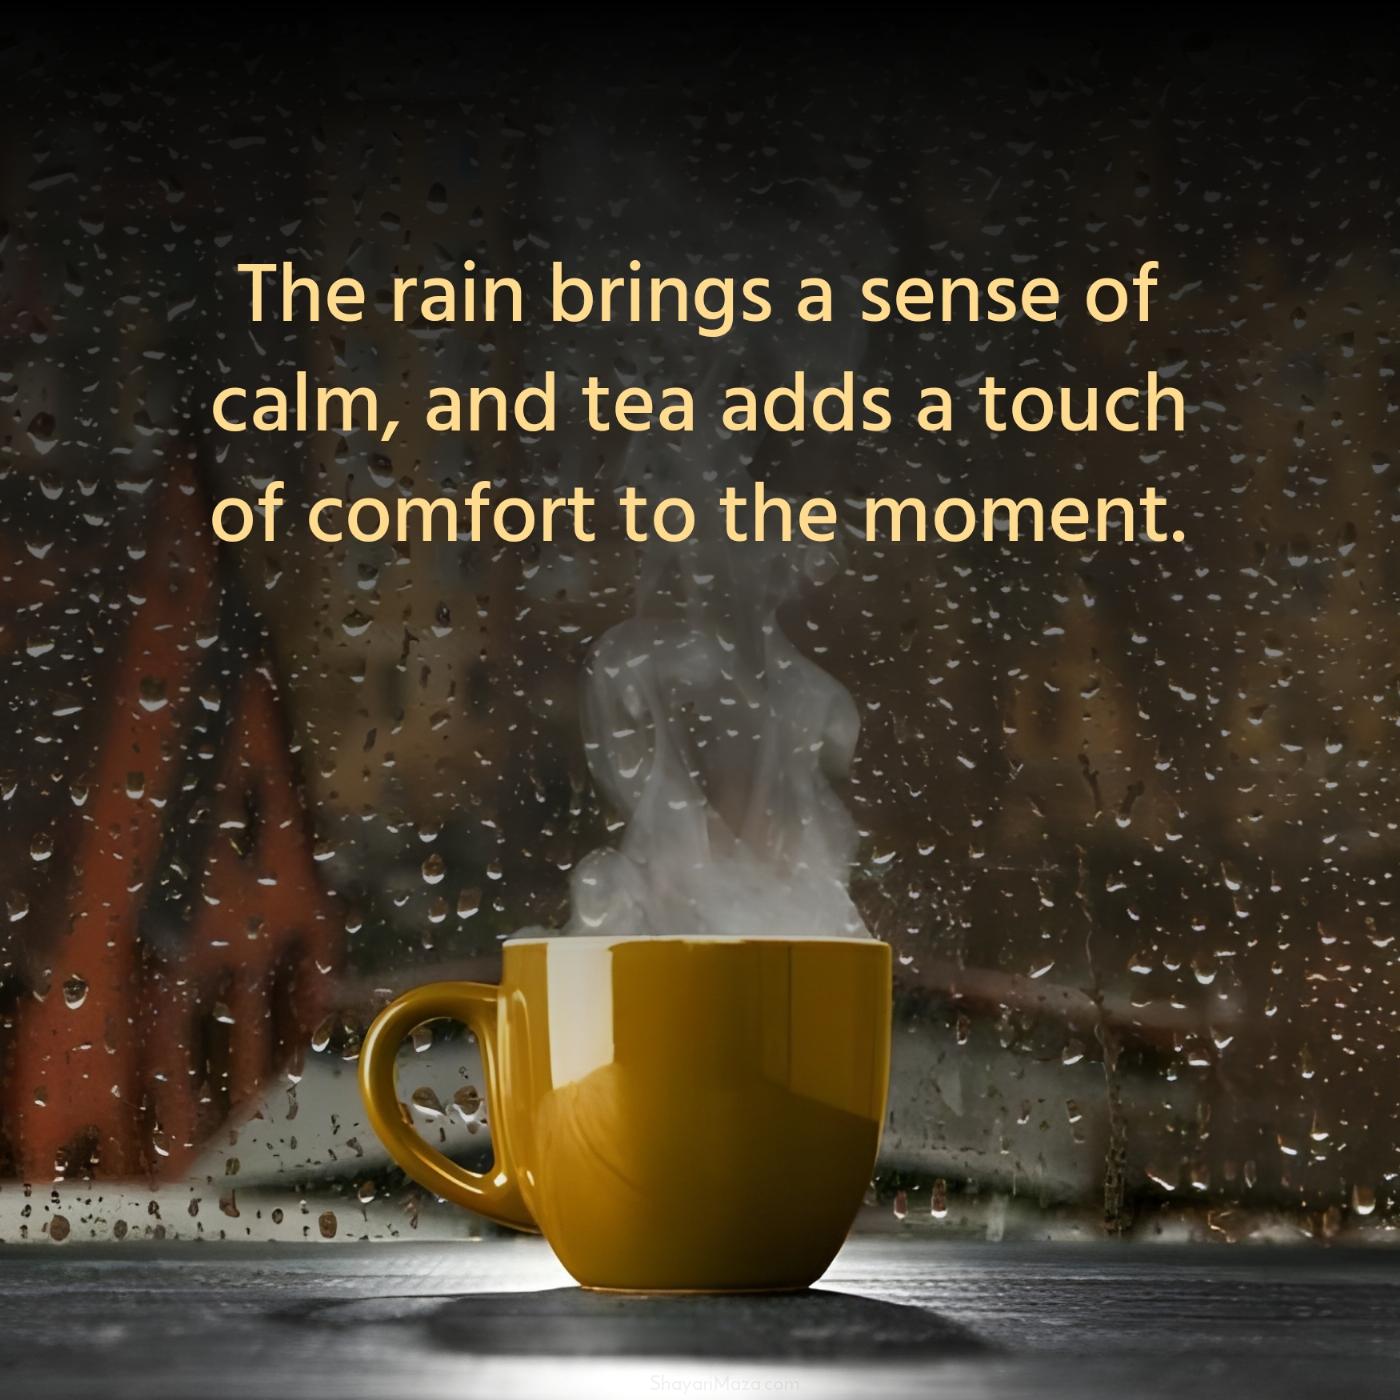 The rain brings a sense of calm and tea adds a touch of comfort